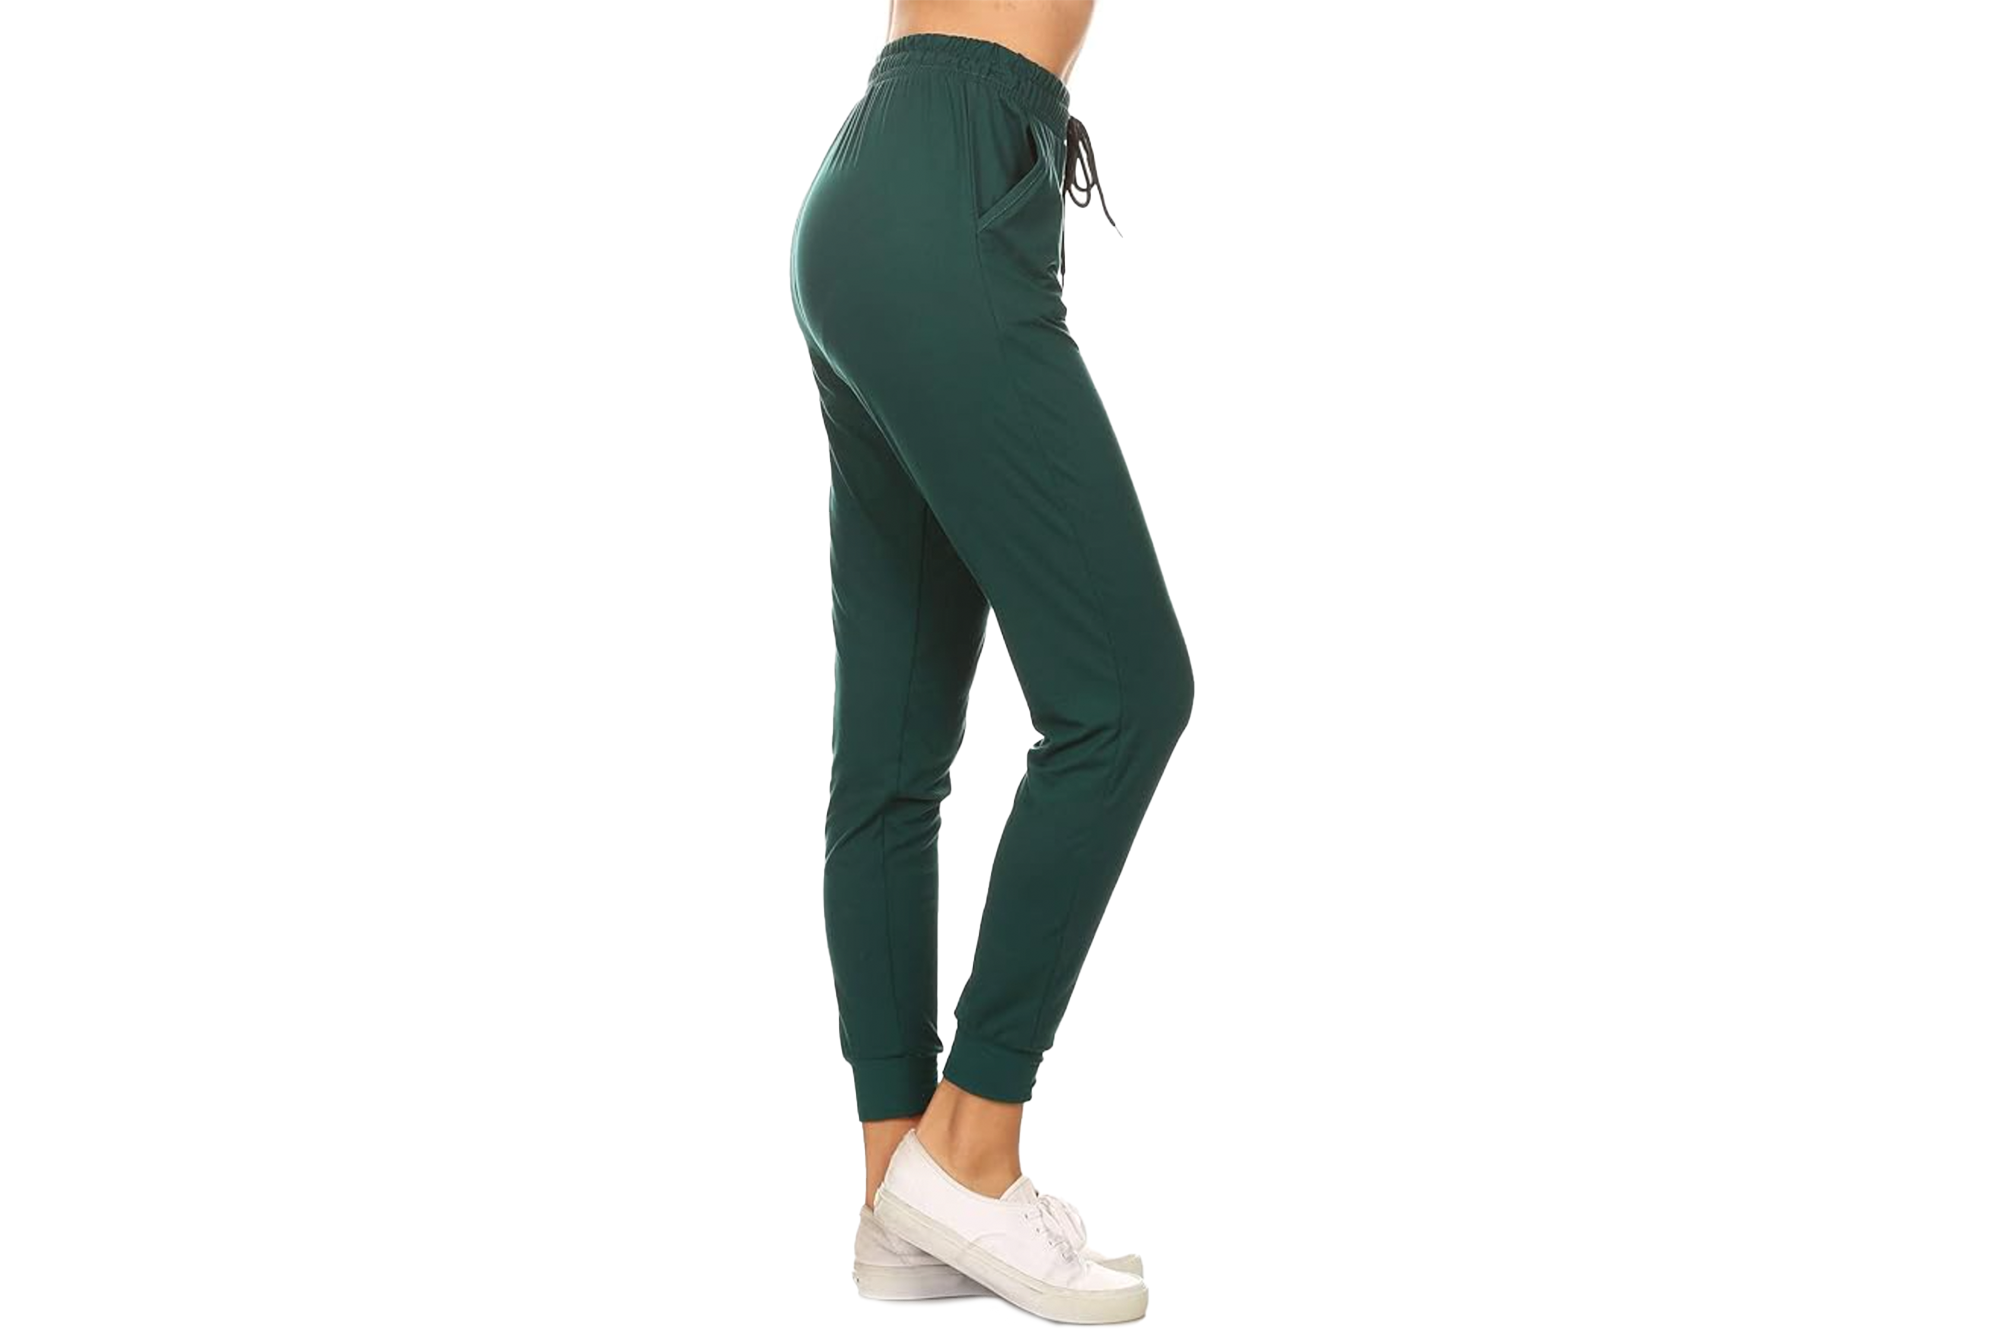 Lowest Price: Leggings Depot Women's Relaxed-fit Jogger Track Cuff  Sweatpants with Pockets for Yoga, Workout (Over 94,000 Reviews)